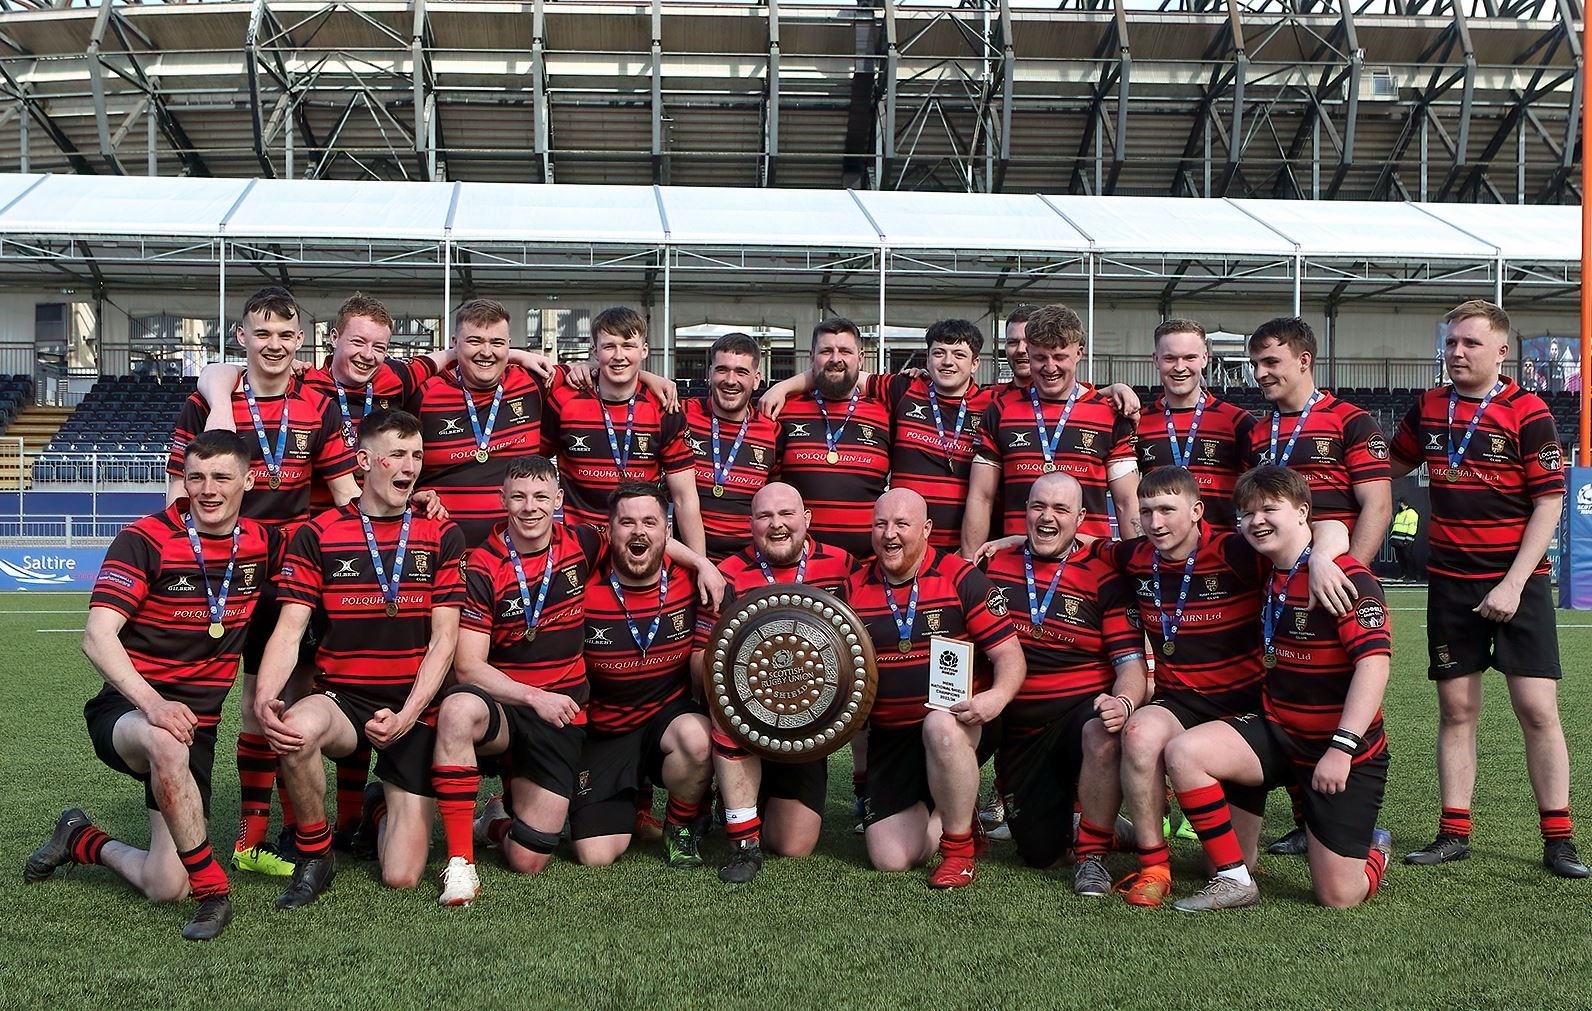 The winning Cumnock side with the national shield. Picture: John MacGregor